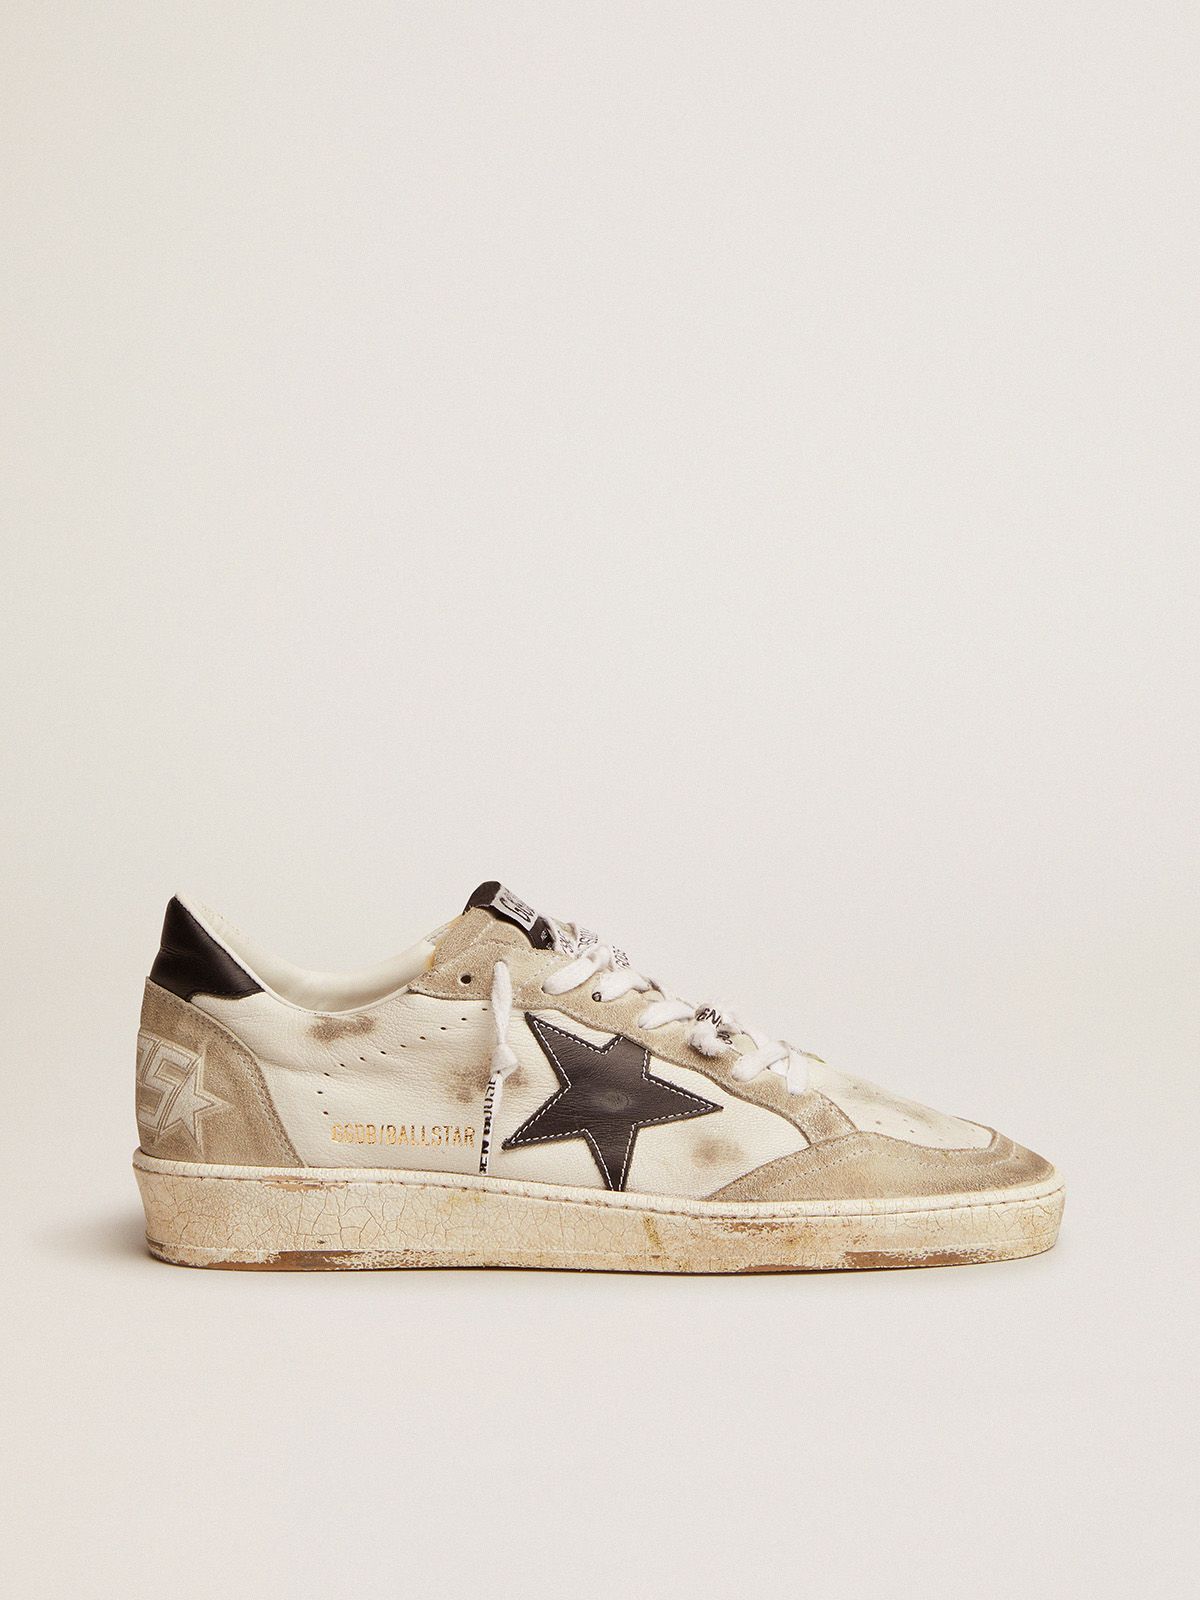 Golden Goose Sneakers Donna Ball Star sneakers in white leather and ice-gray suede with black leather detail